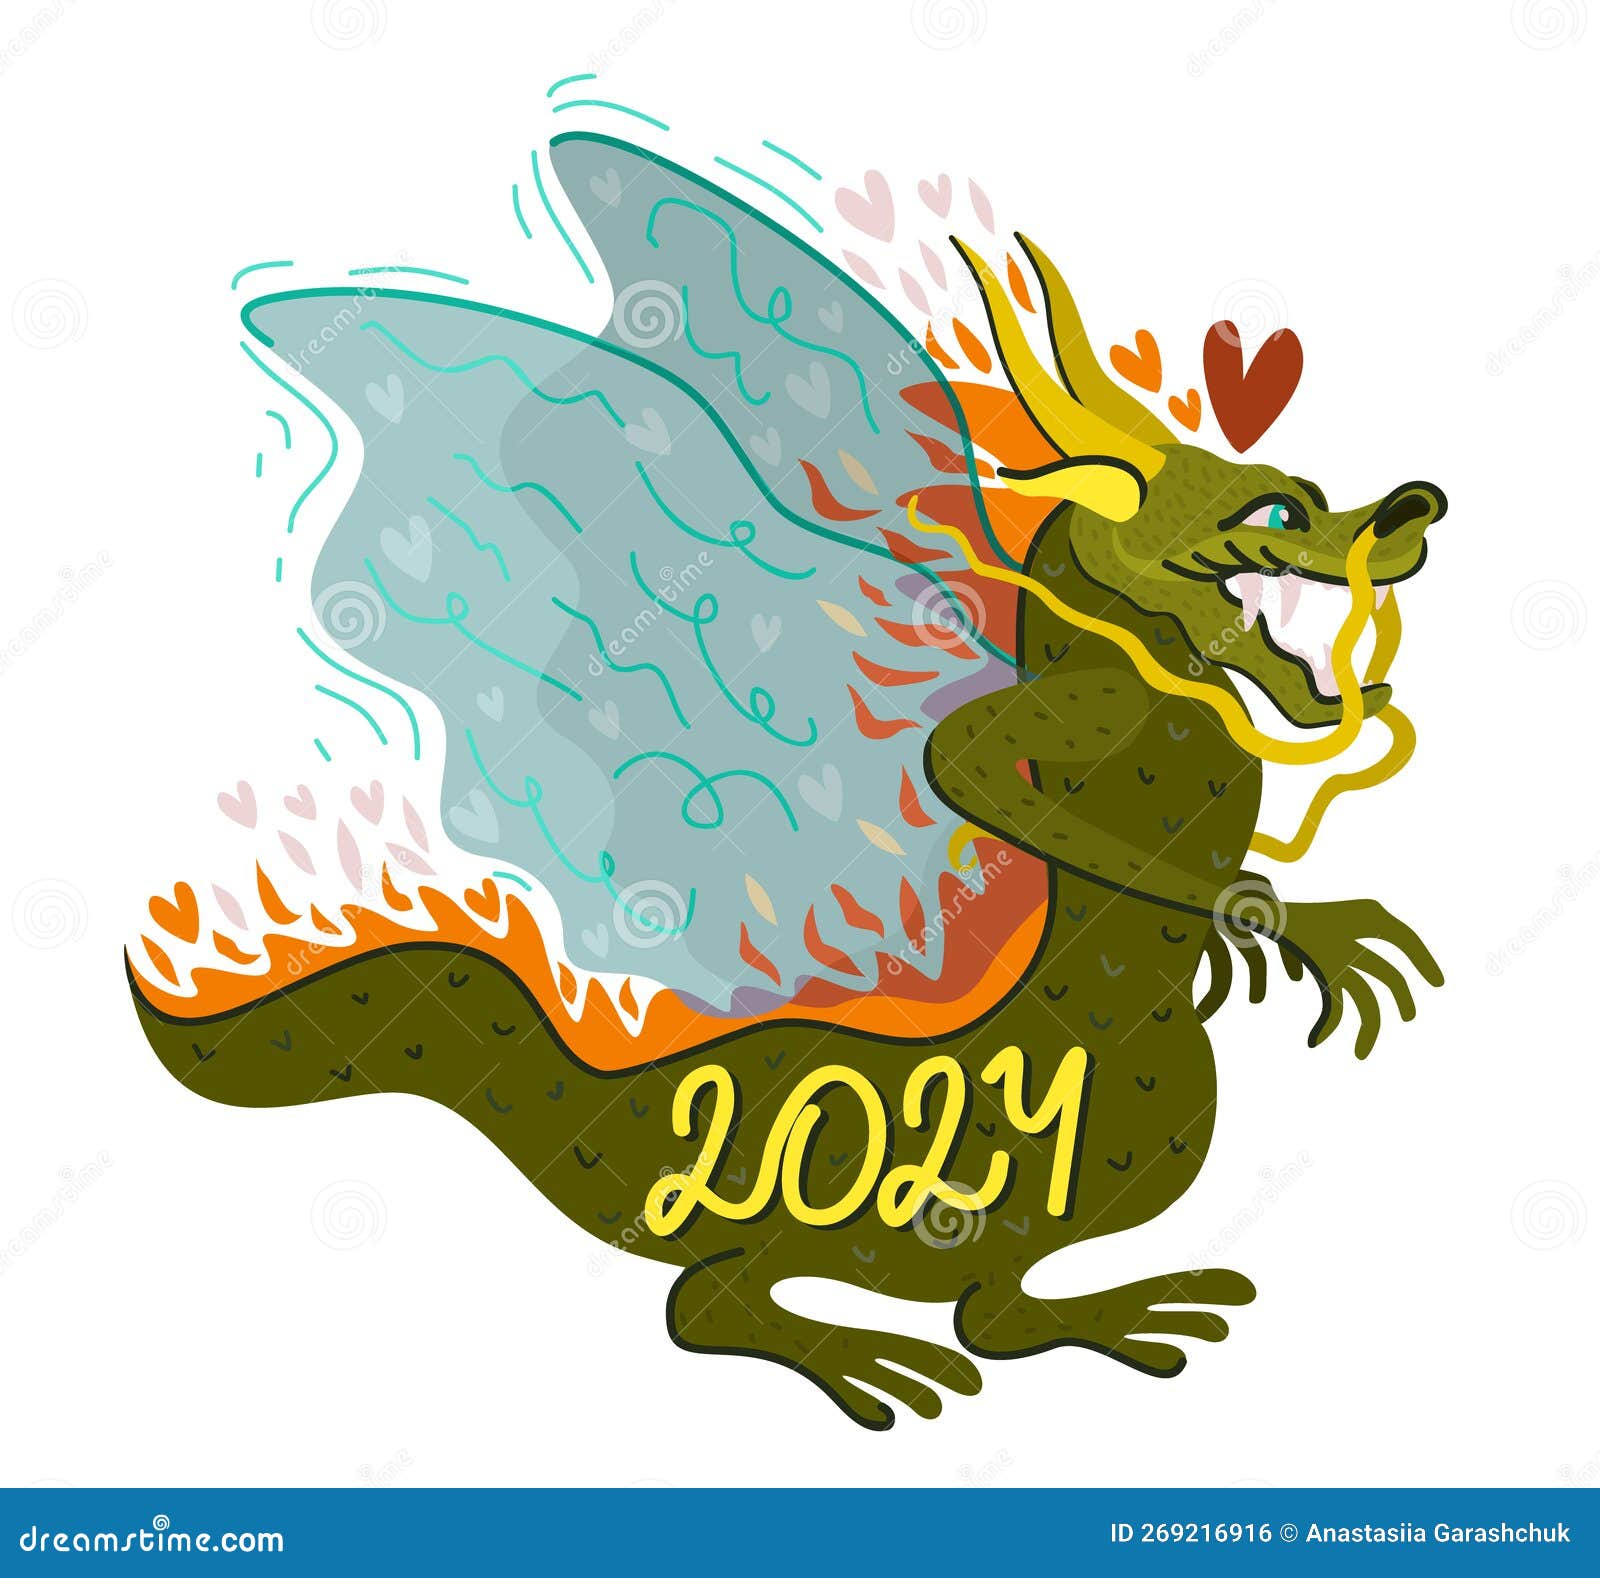 Vector Isolated Illustration of Dragon on Fire. Year of the Dragon